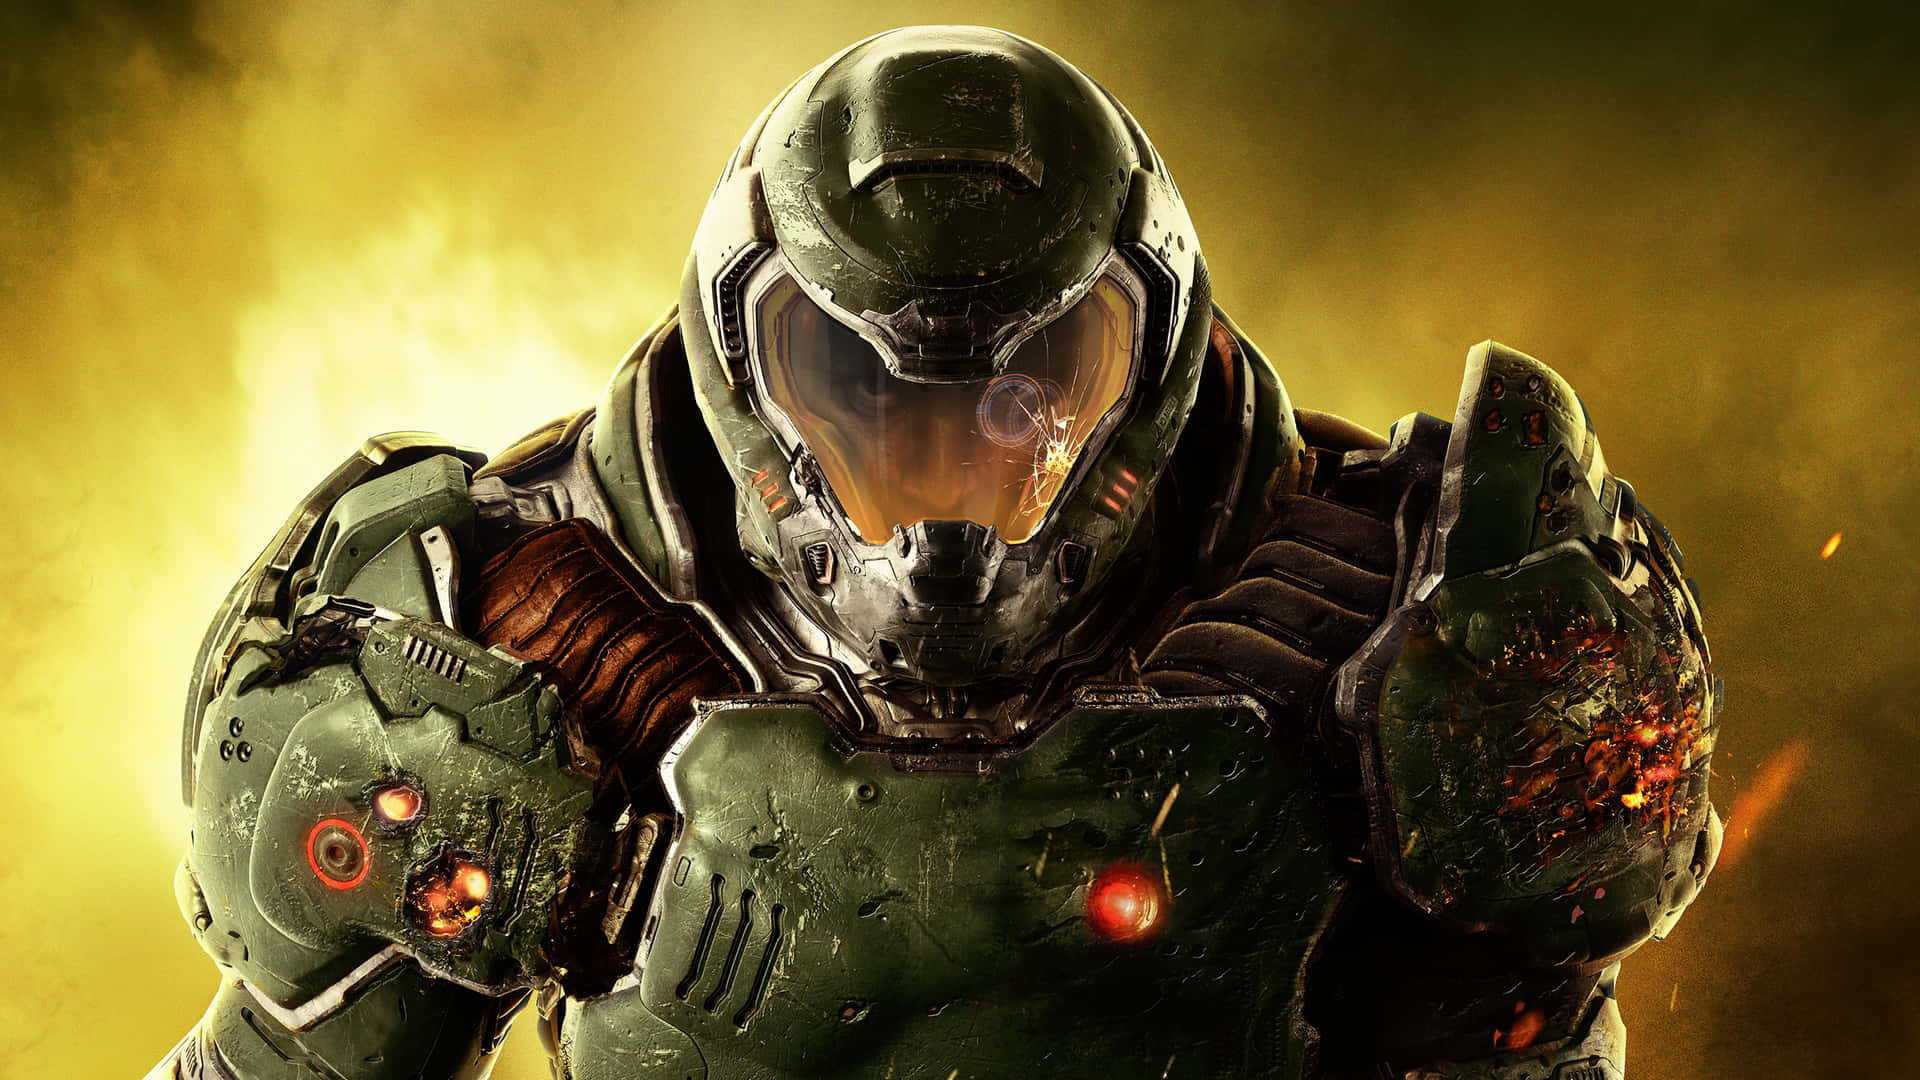 Take control of the ultimate doom slayer and unleash hell Wallpaper